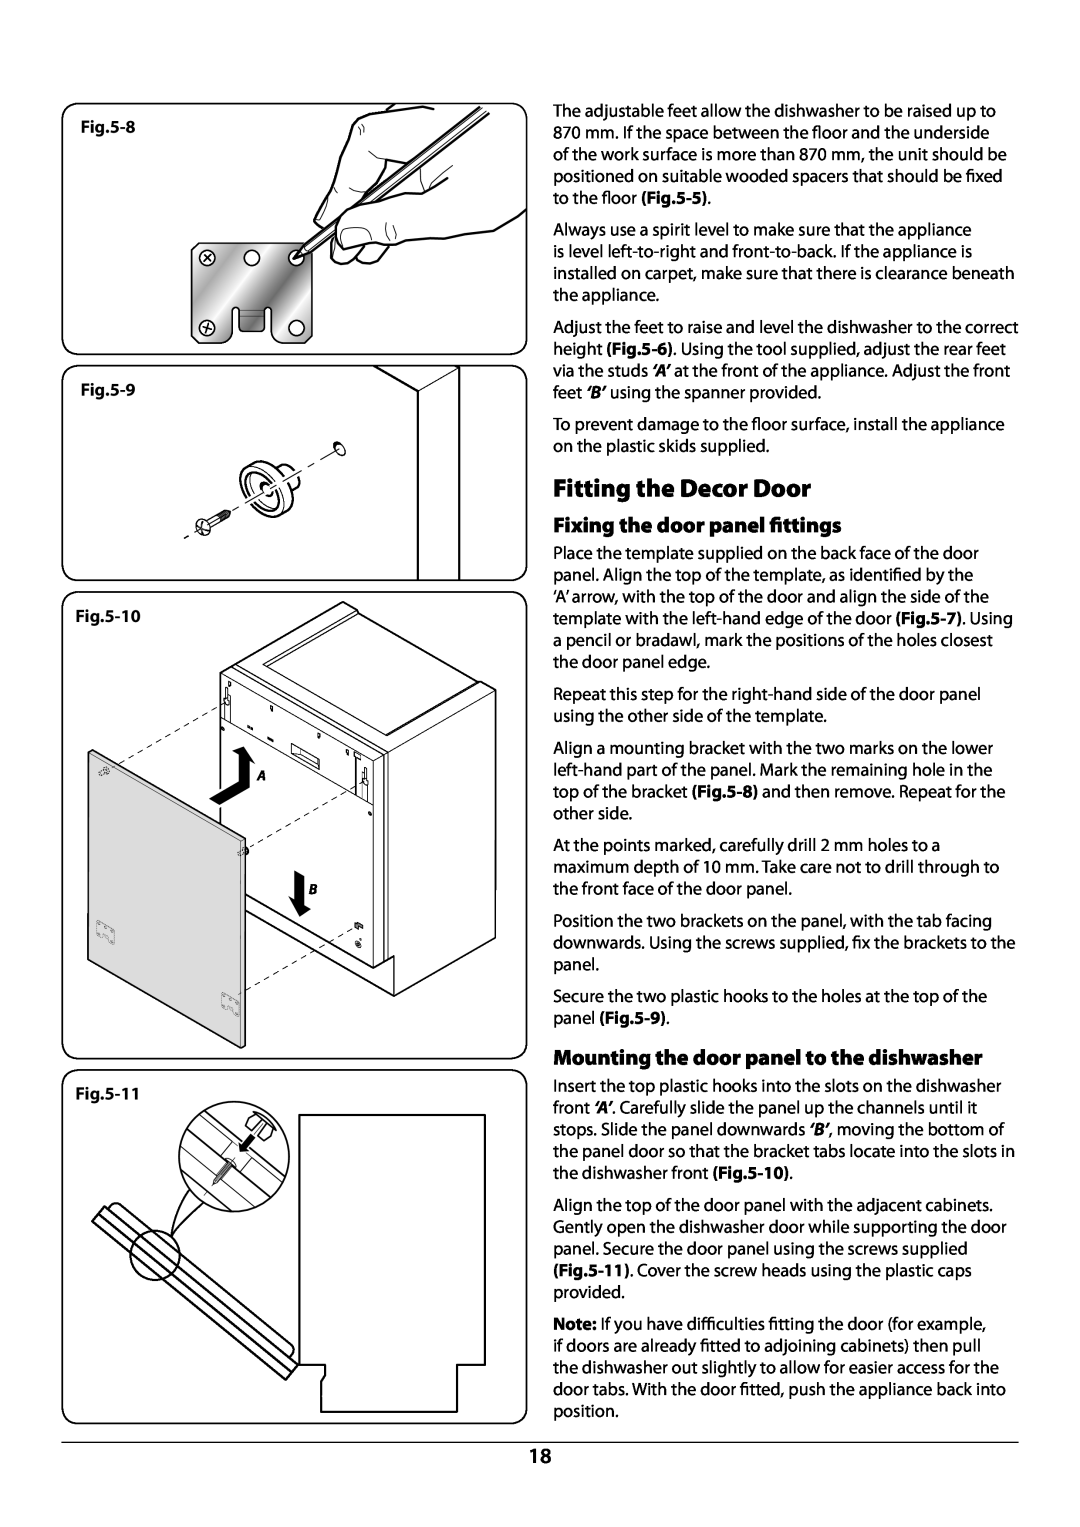 Rangemaster RDW459FI/SF Fitting the Decor Door, Fixing the door panel fittings, Mounting the door panel to the dishwasher 